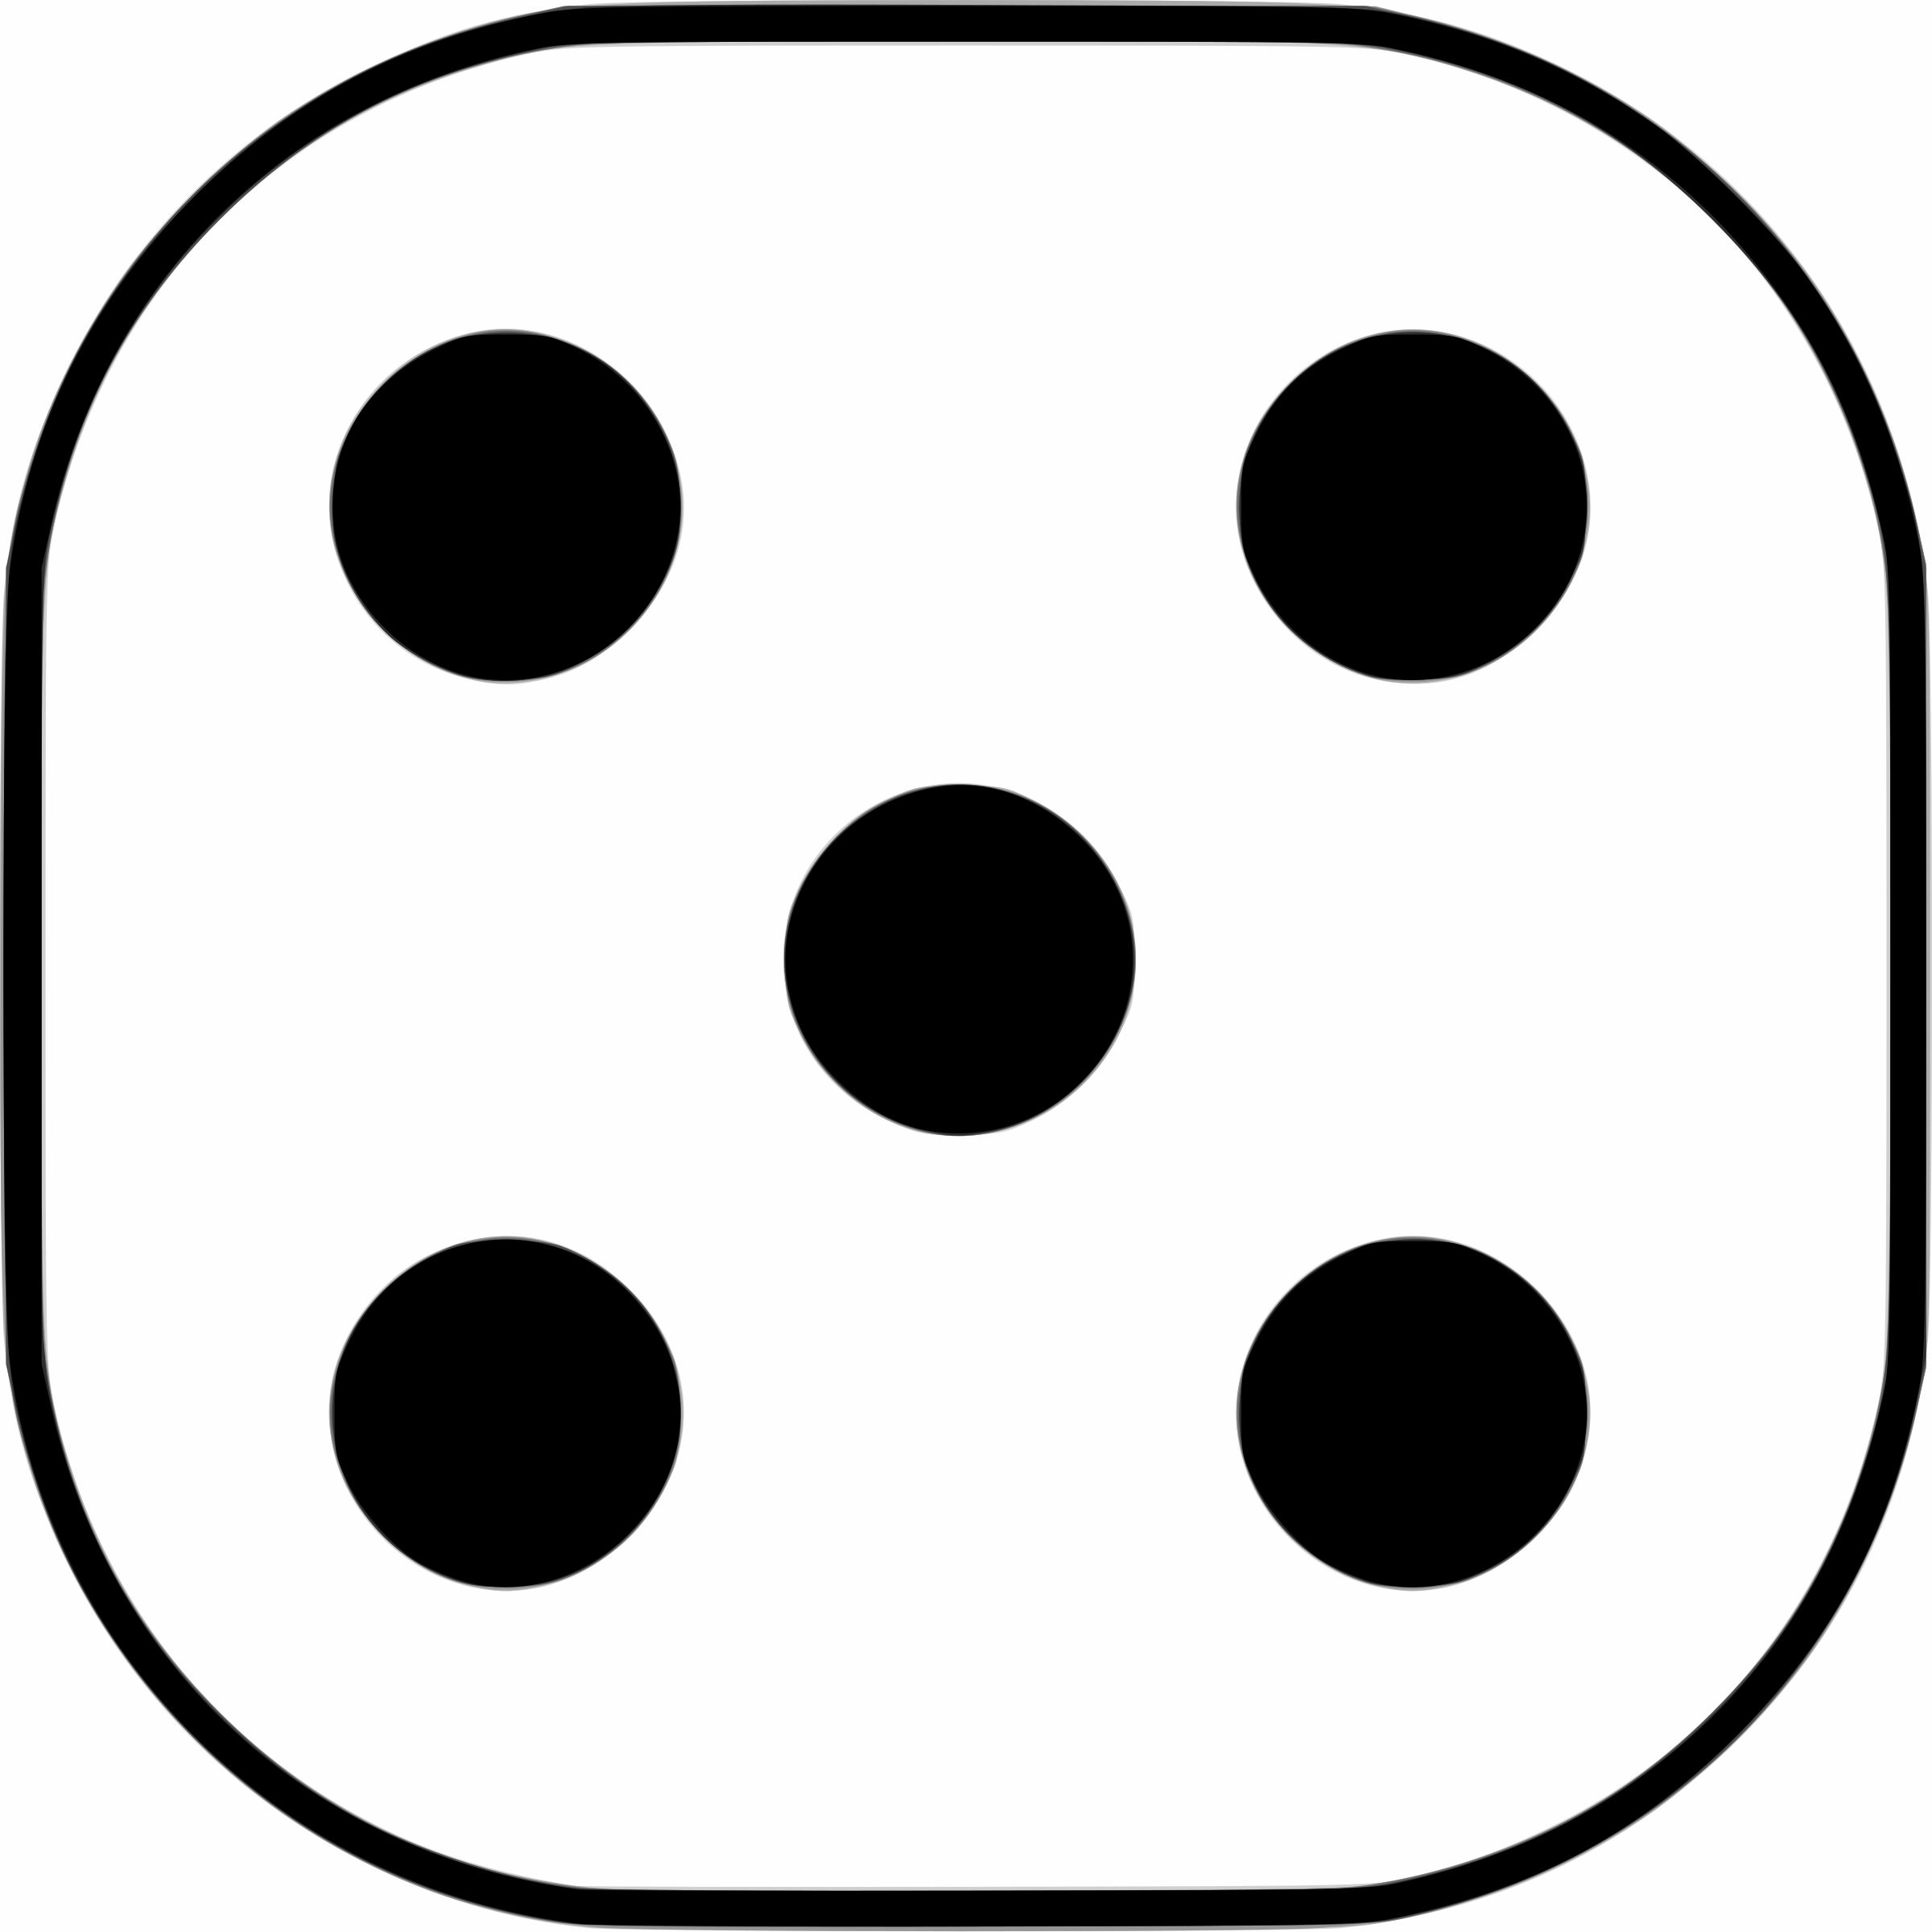 Fives dice clipart